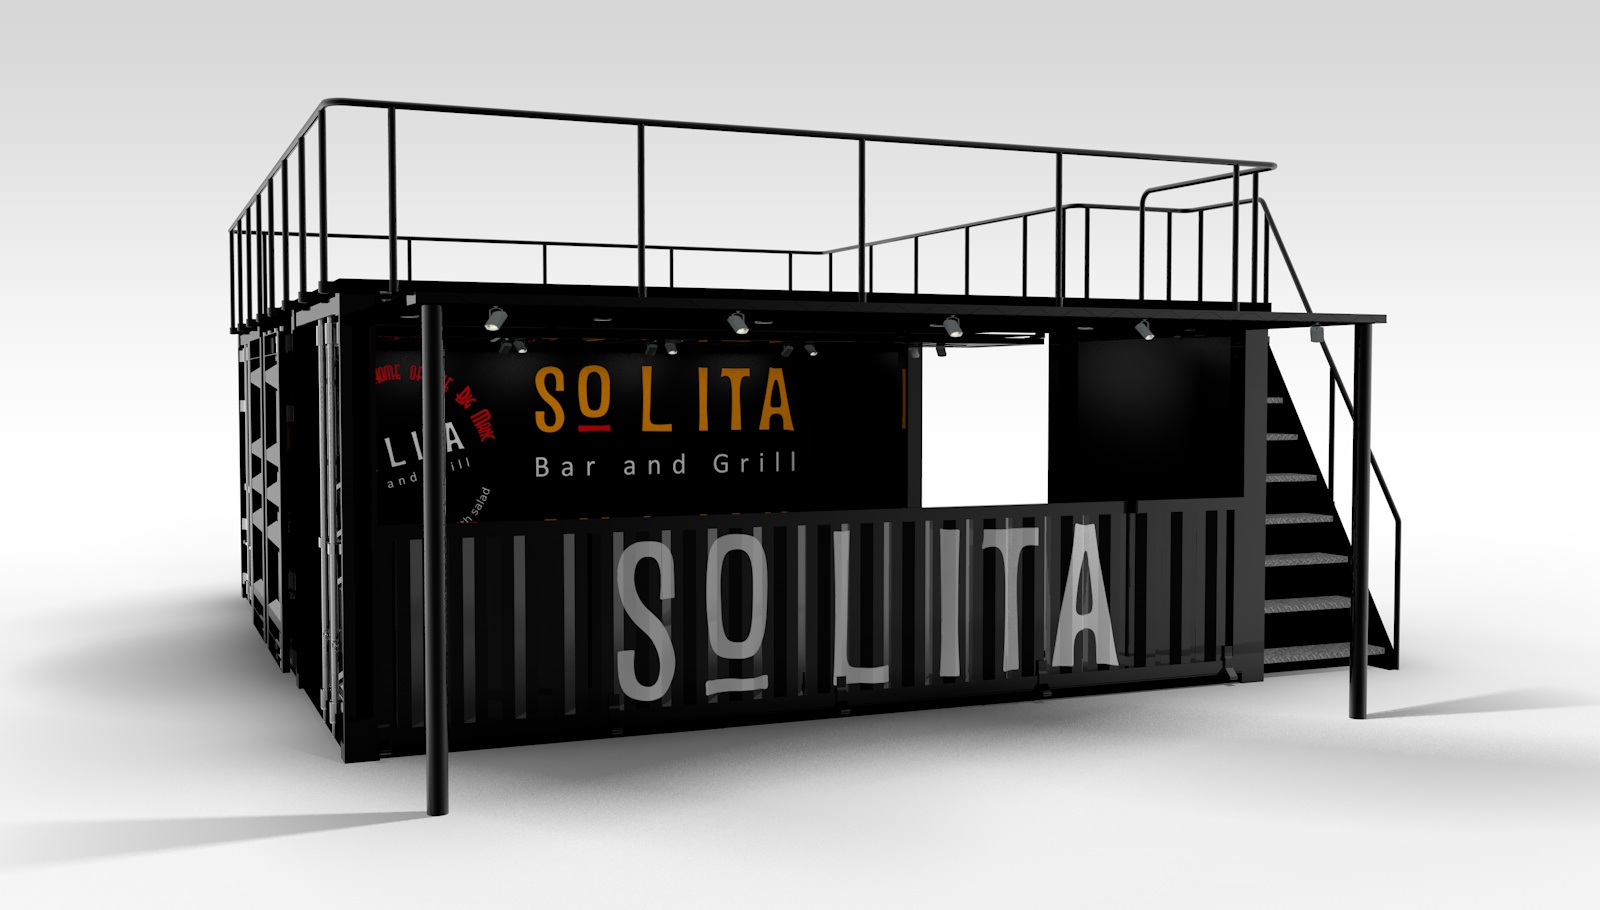 Shipping Container Pop-up Restaurant